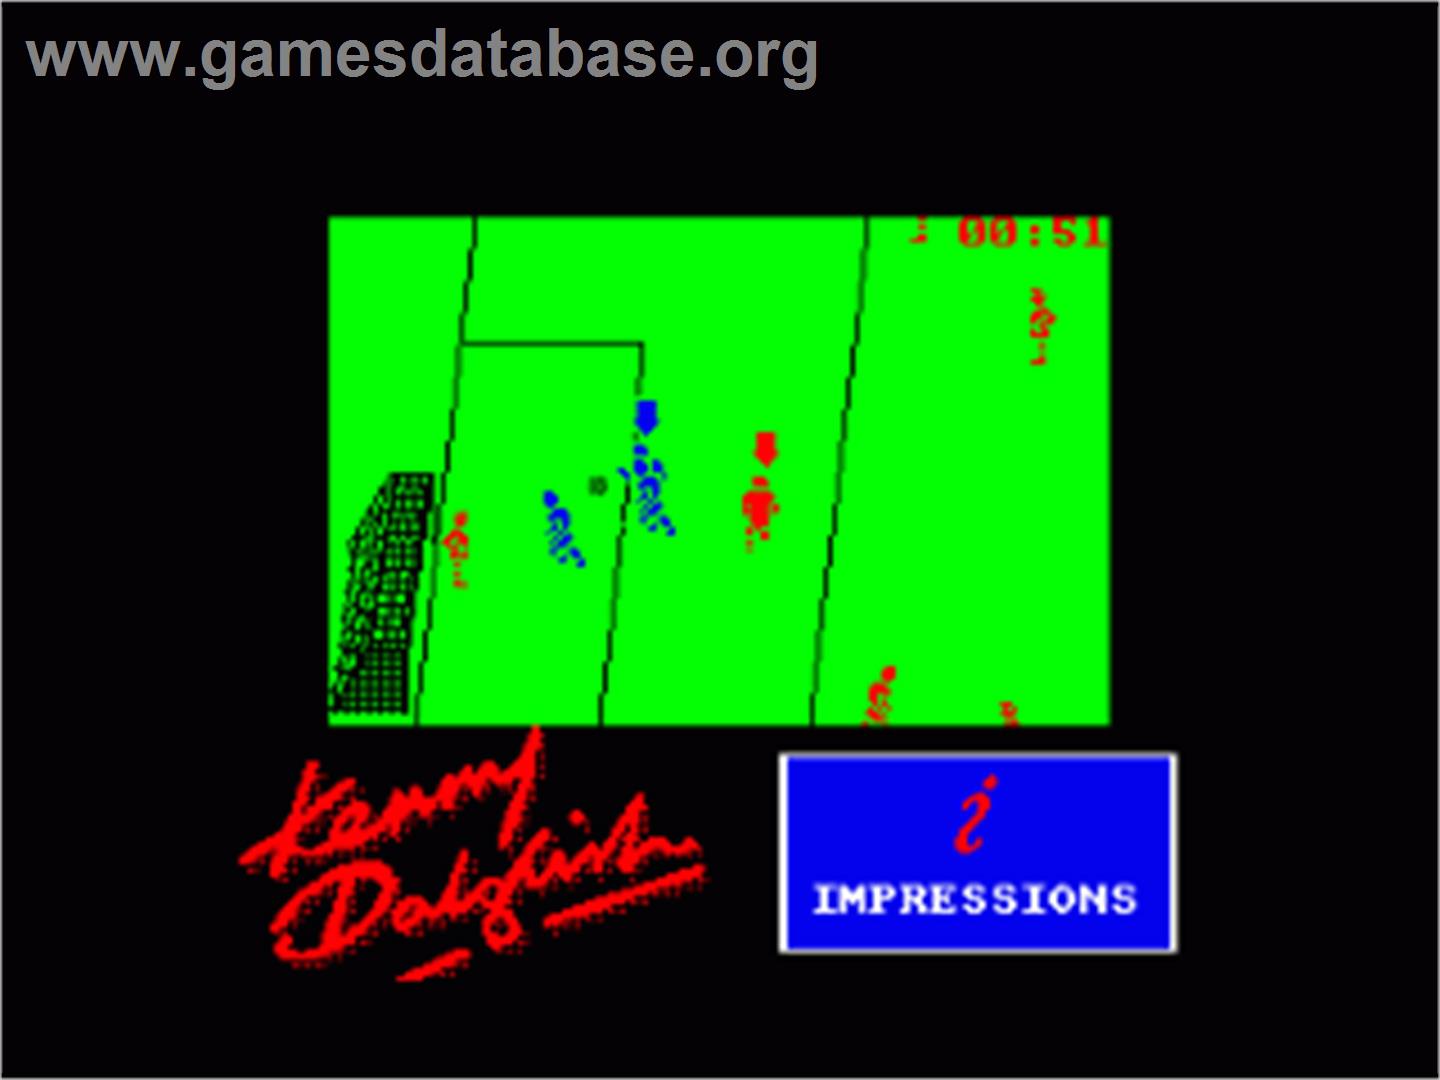 Kenny Dalglish Soccer Manager - Amstrad CPC - Artwork - In Game